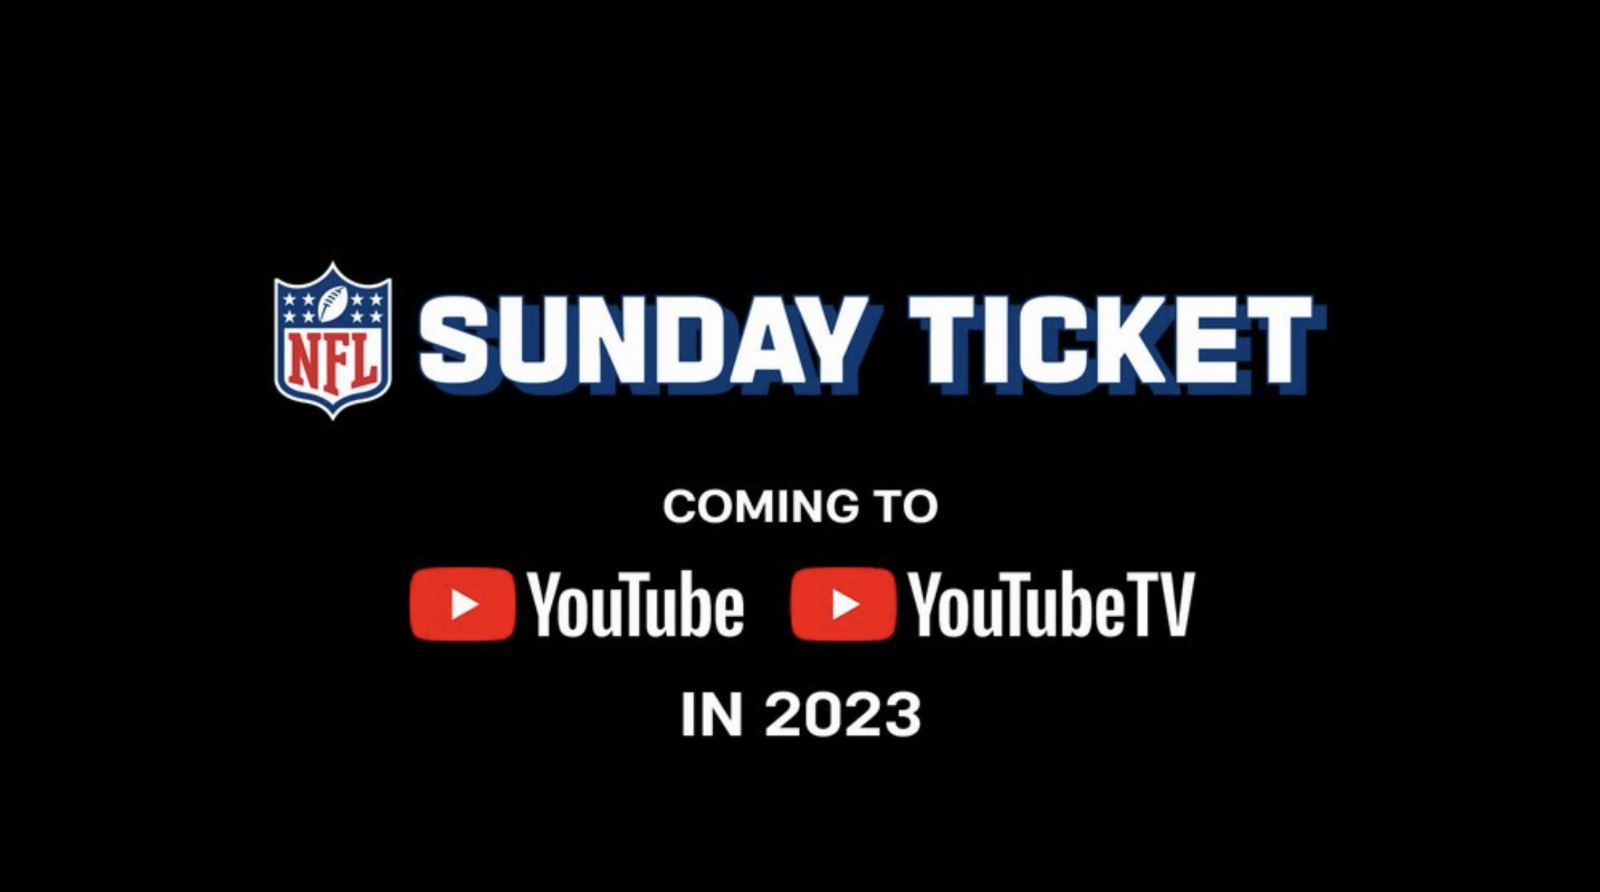 NFL considers a cheaper Sunday Ticket offering on YouTube with fewer games